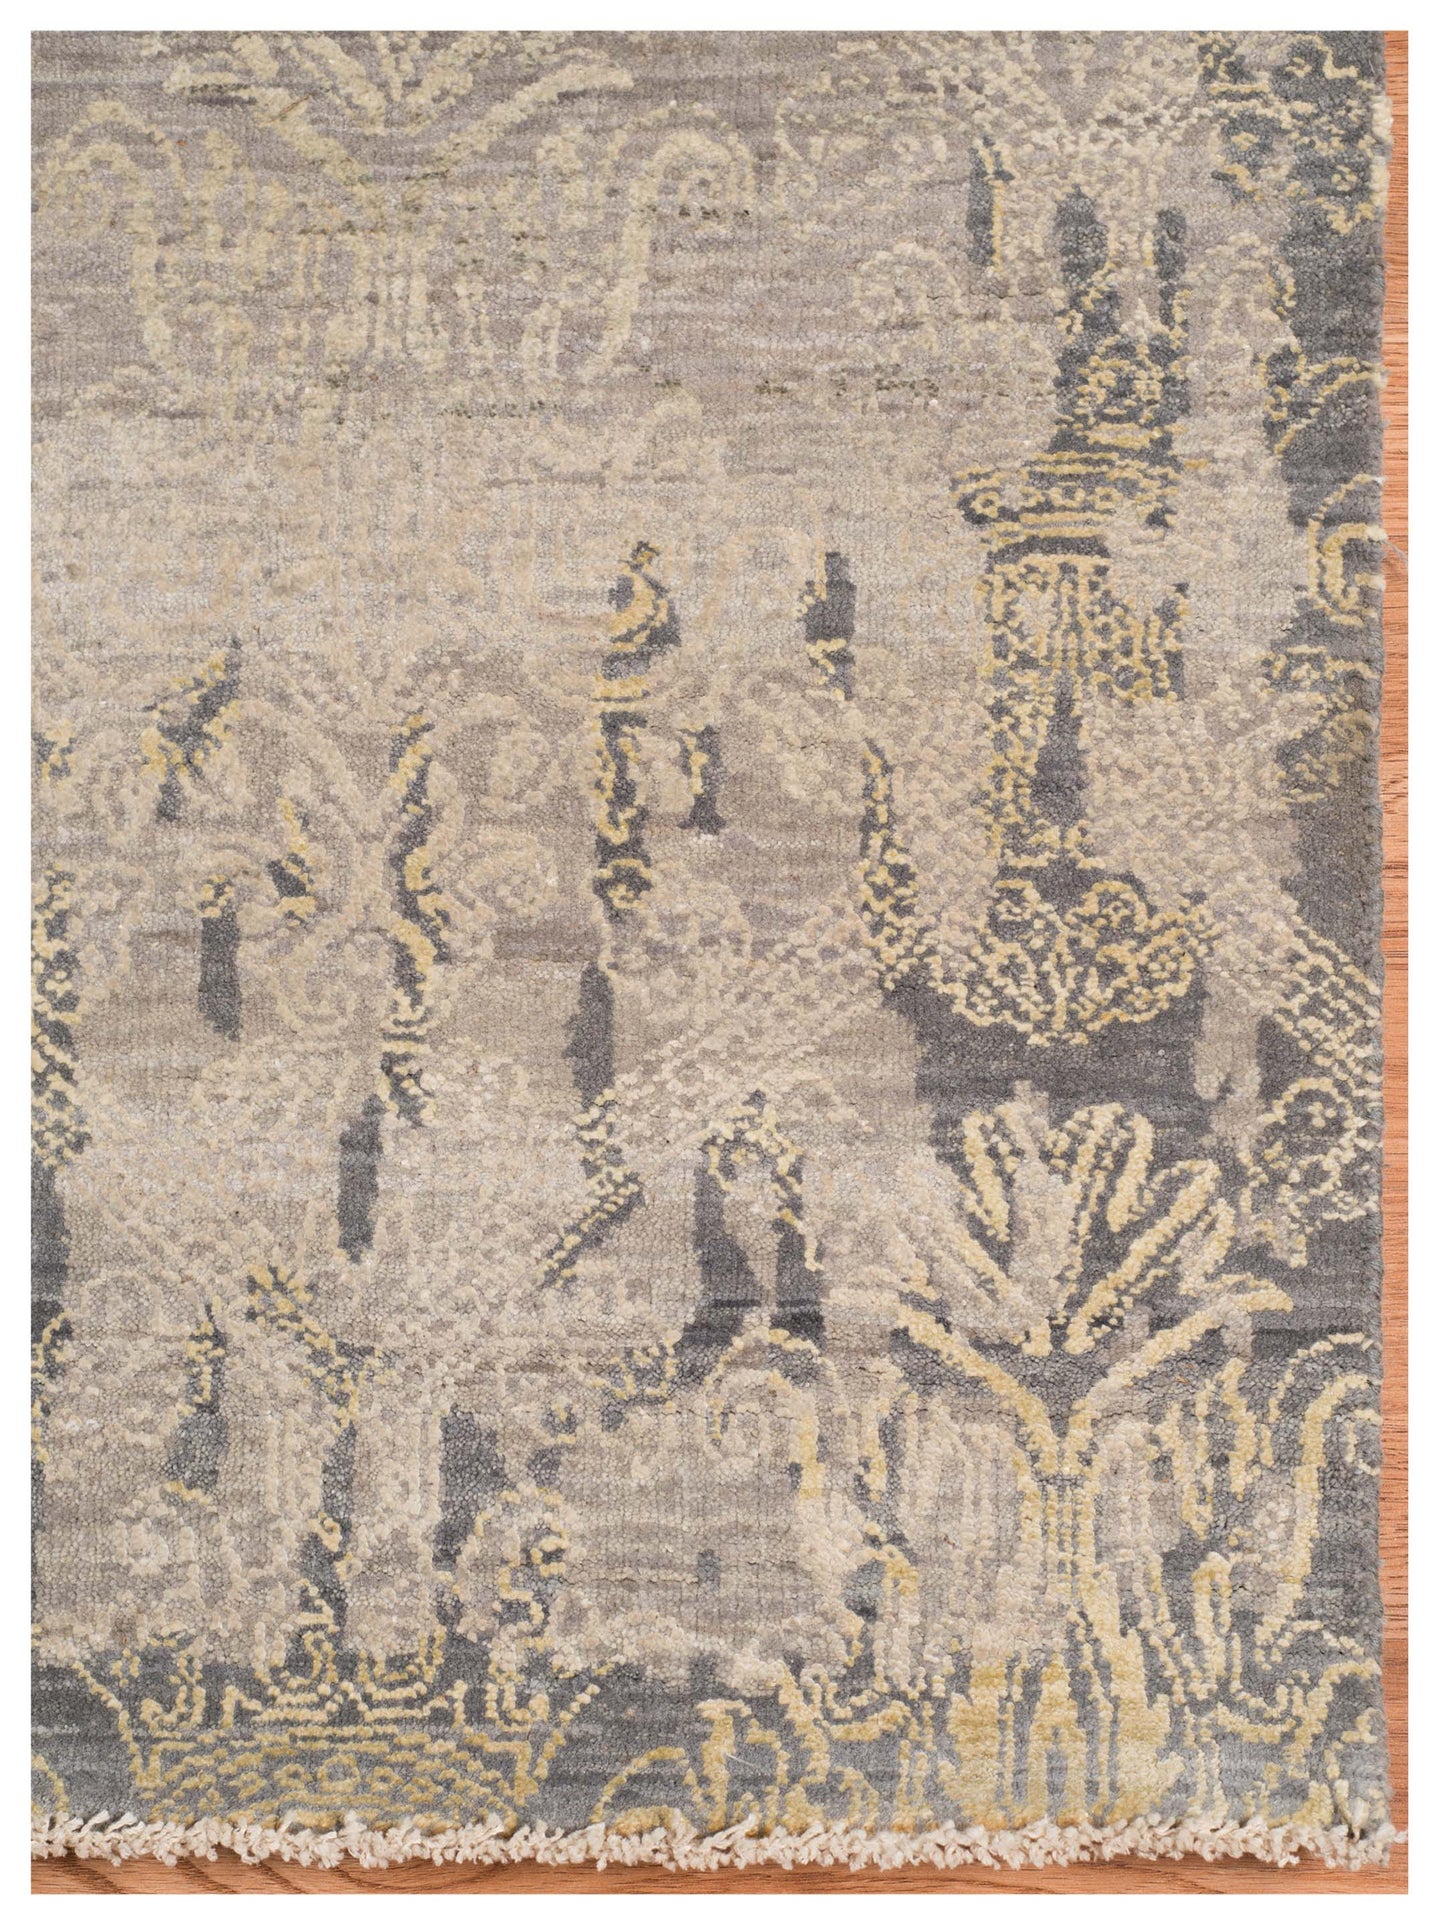 Limited PARKES PA-557 LIGHT GRAY  Transitional Knotted Rug